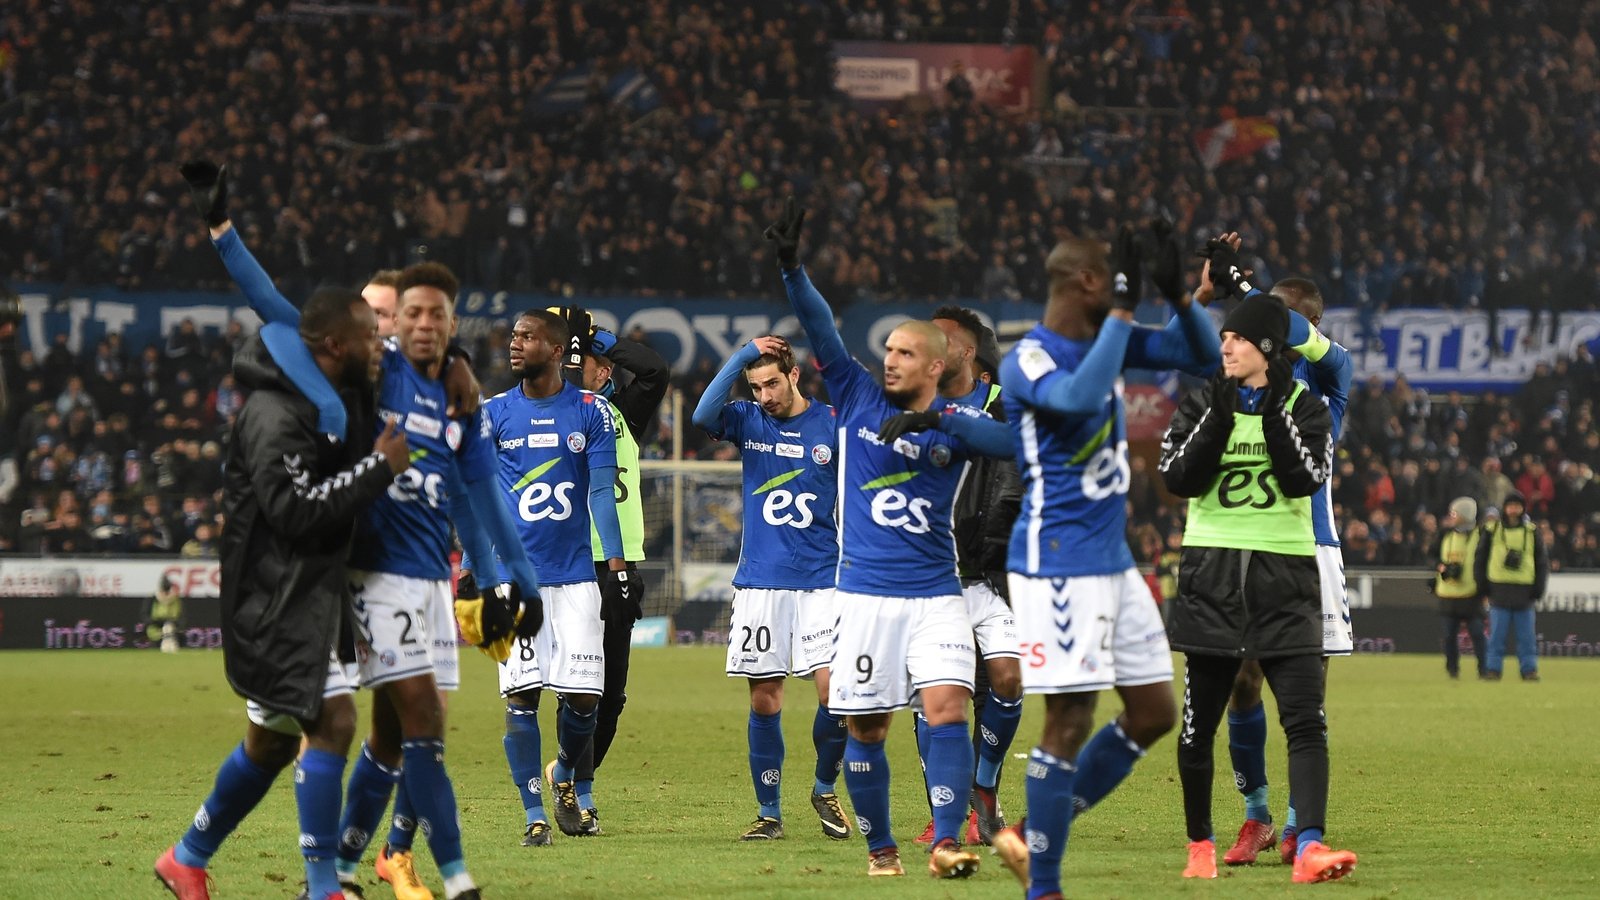 Strasbourg inflict first defeat of the season on PSG